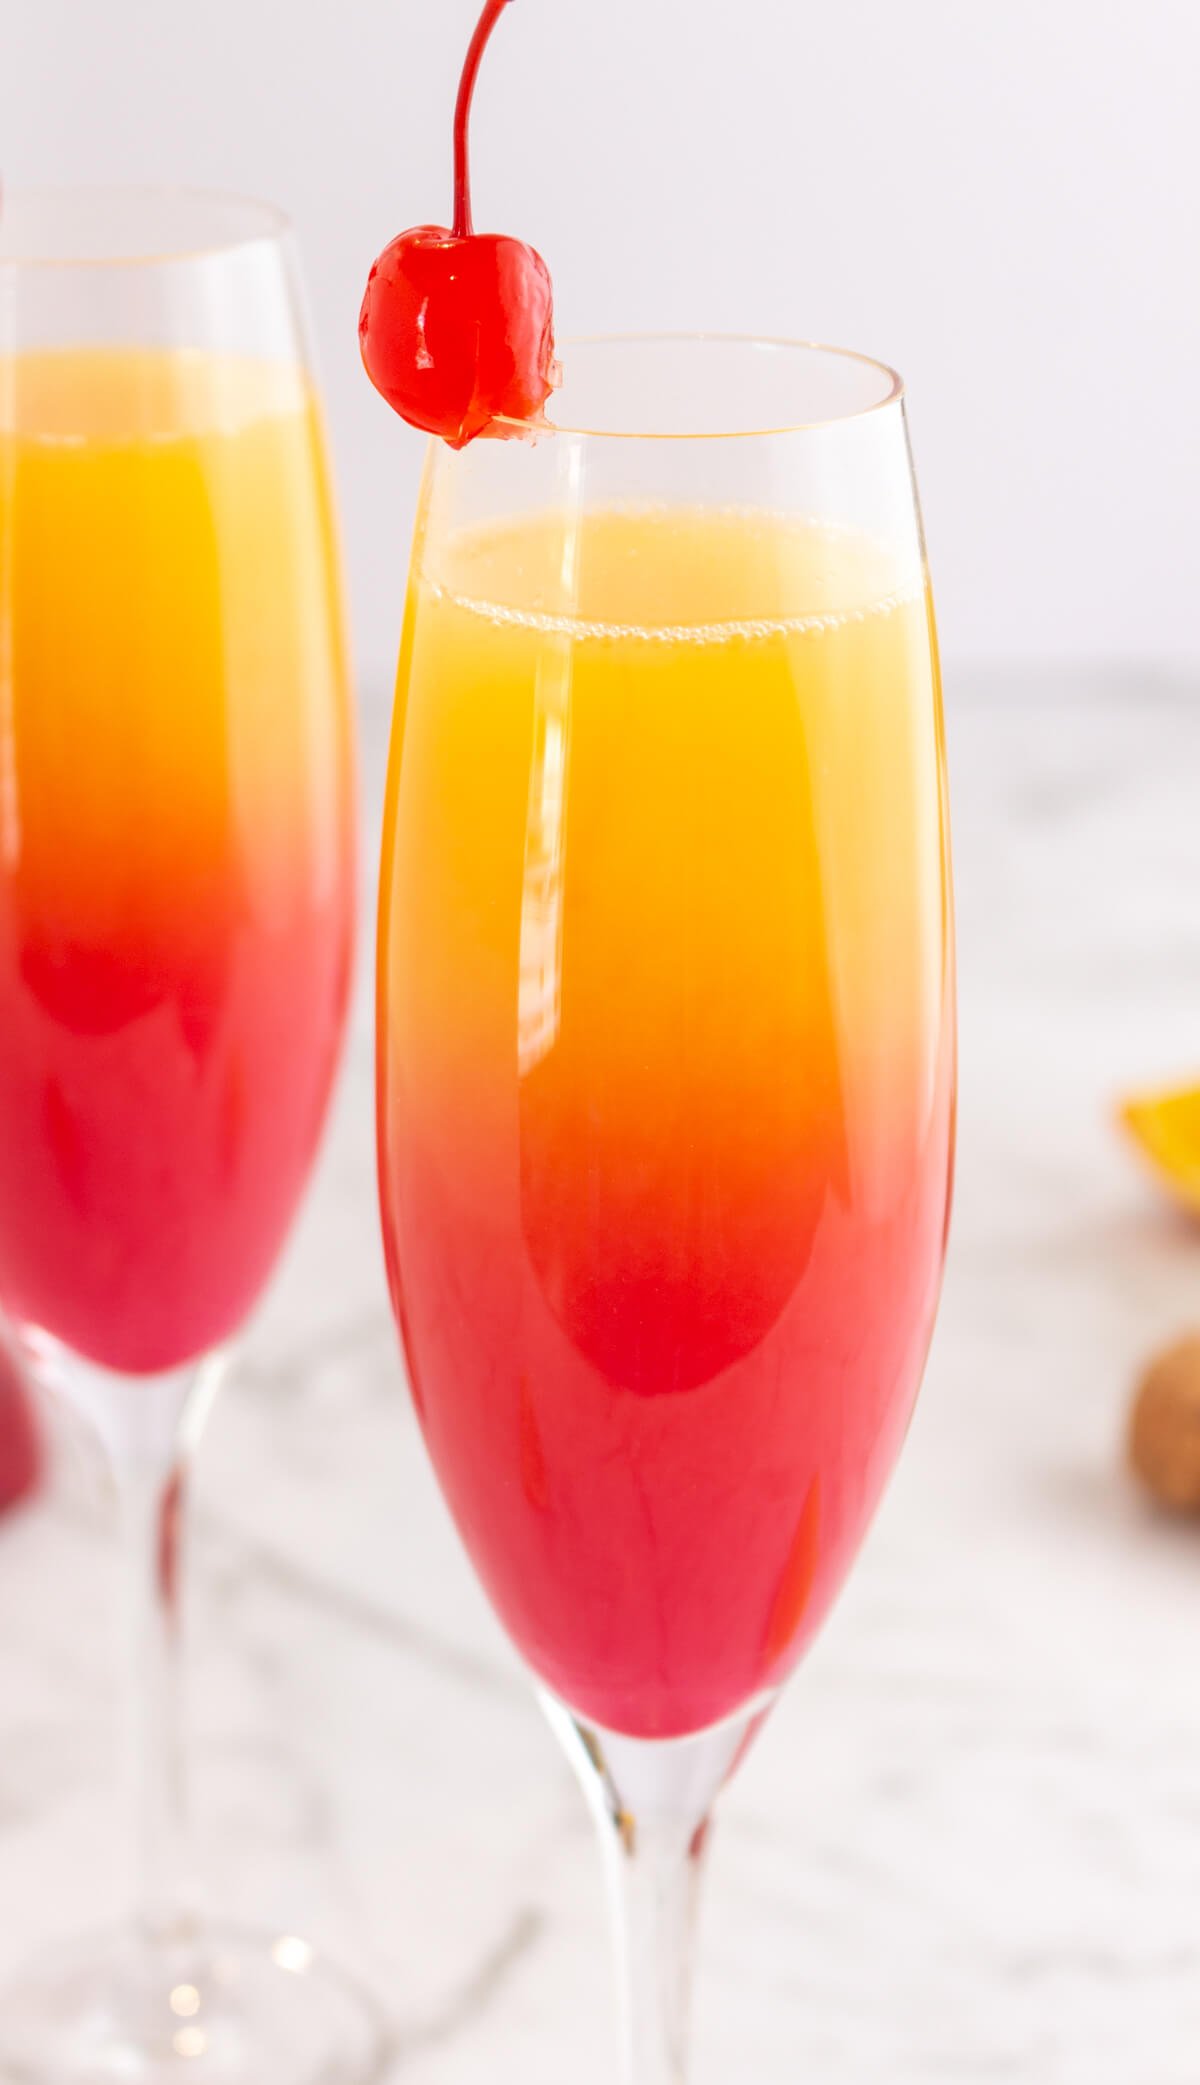 sunset mocktail in a champagne glass with red at the bottom gradually turning into orange then yellow at the top.